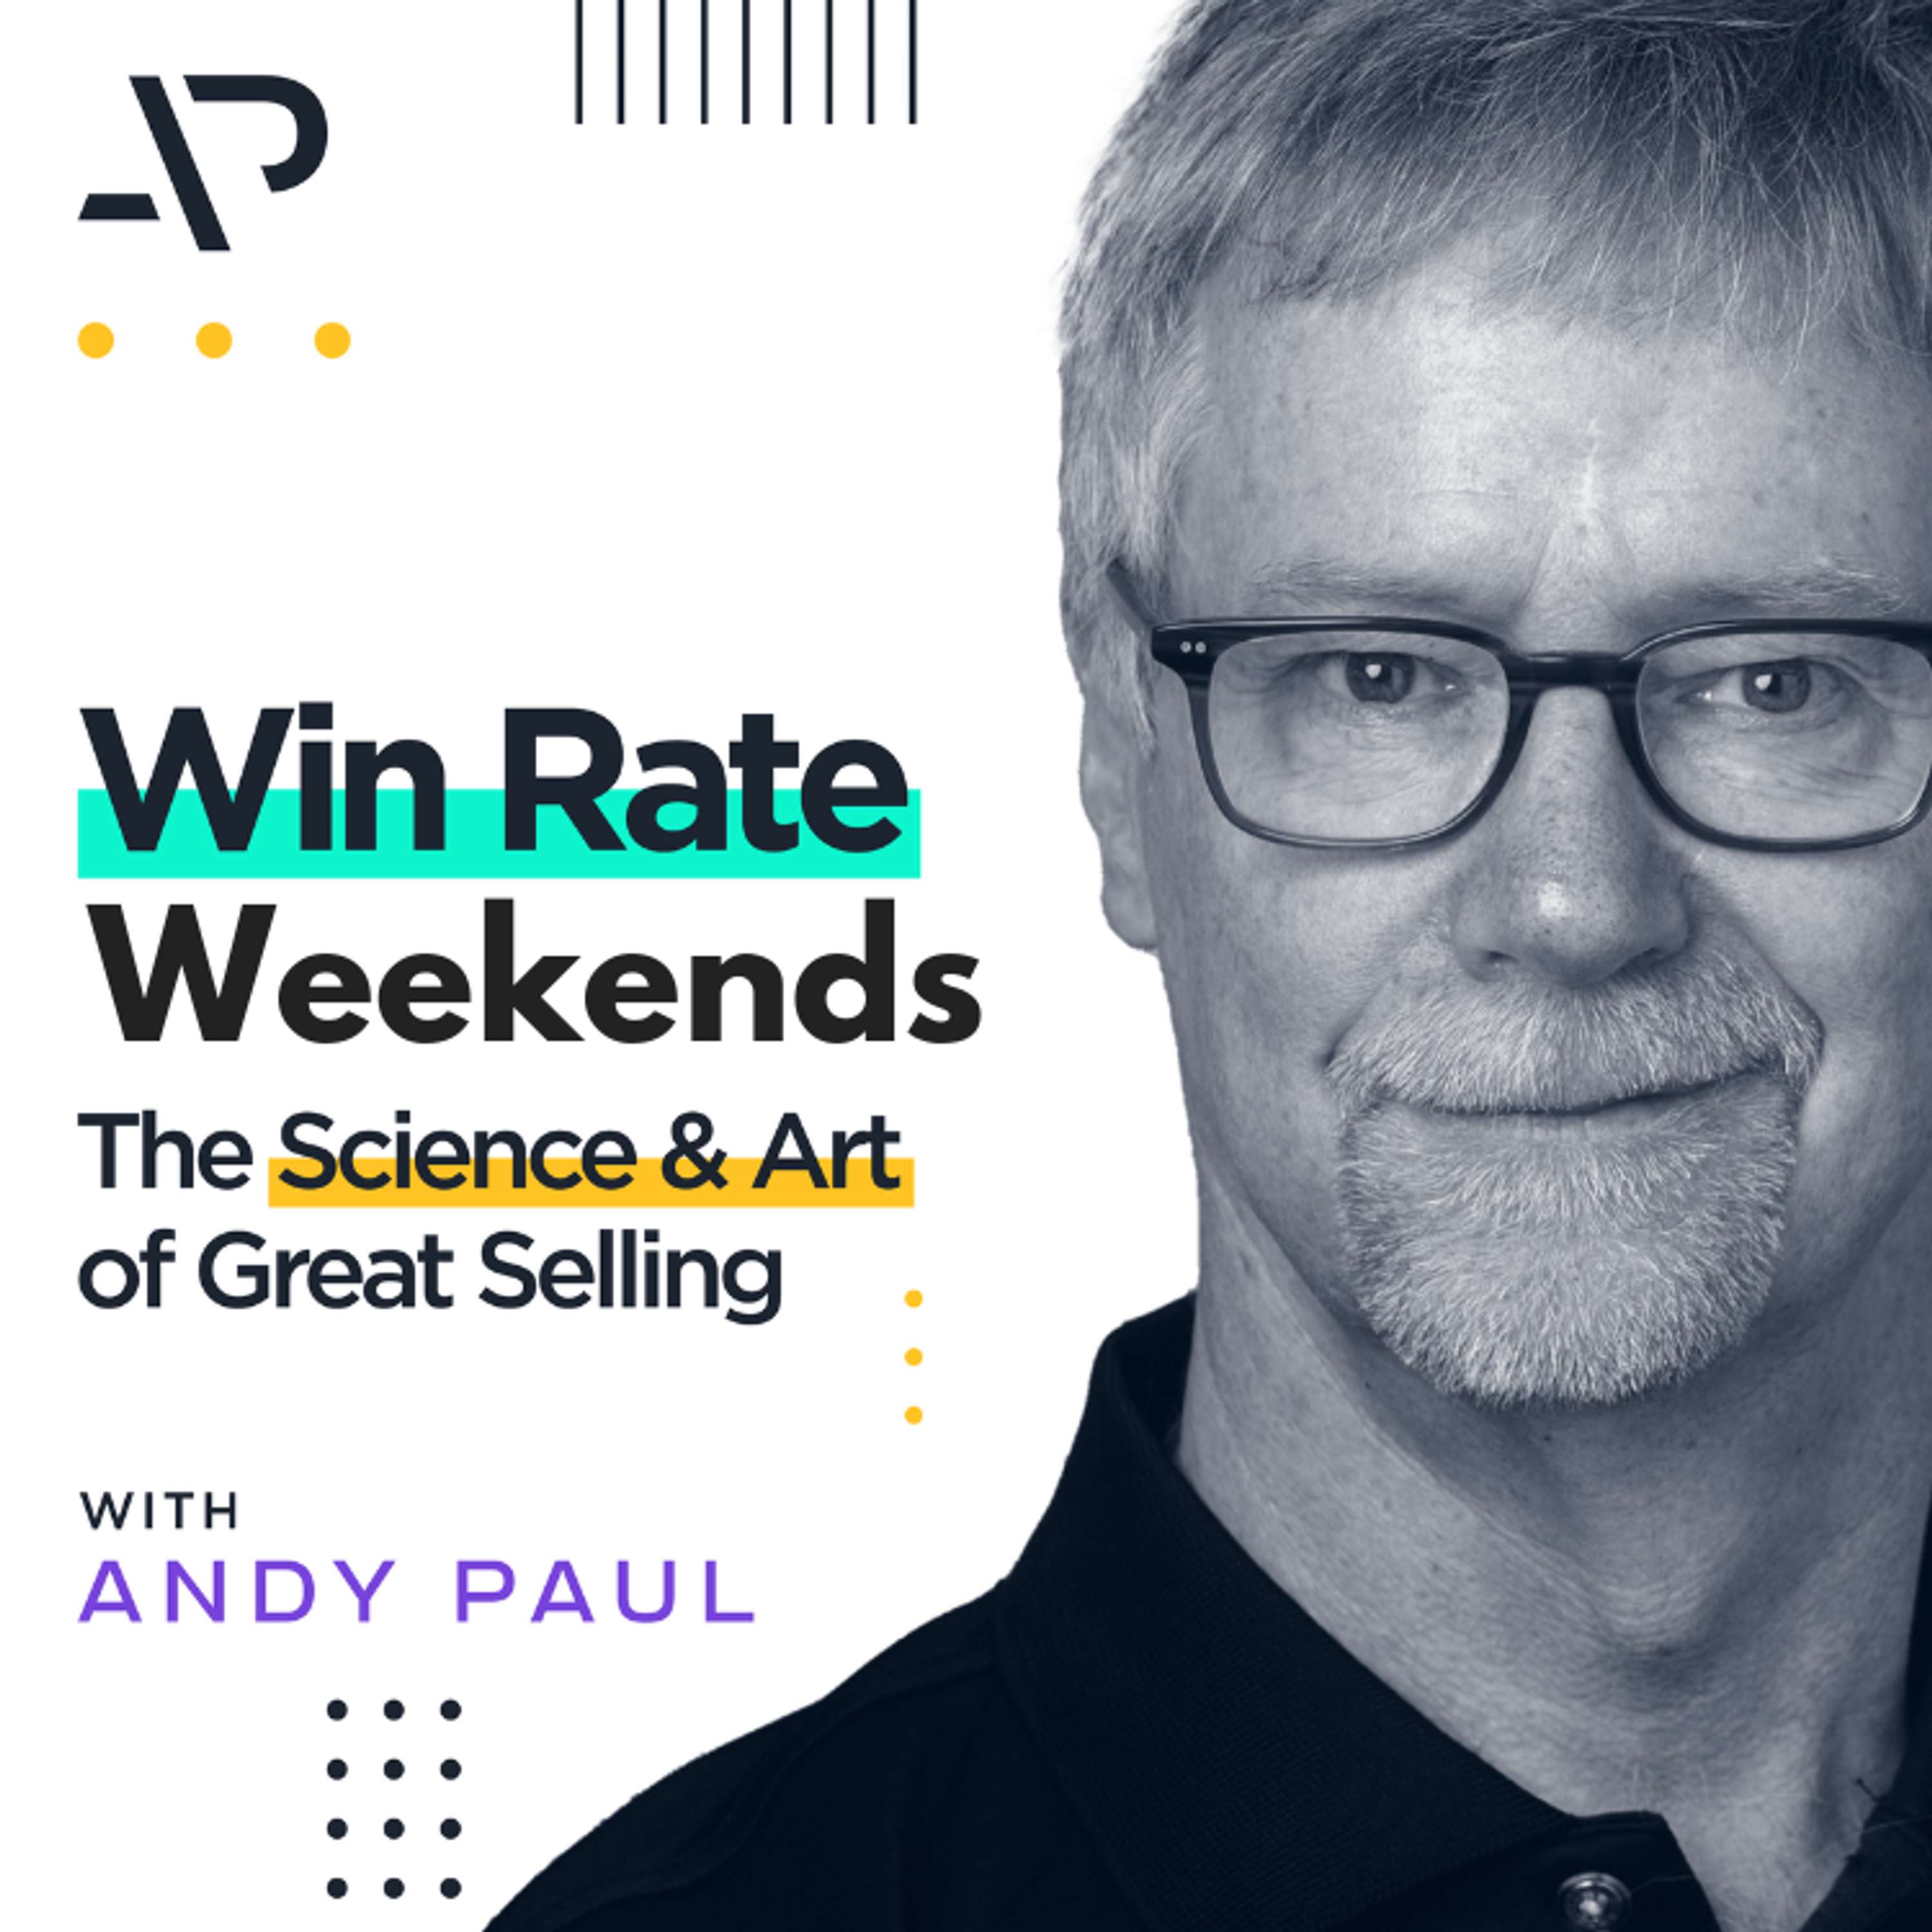 Win Rate Weekends: Are We in a Pipeline Crisis?